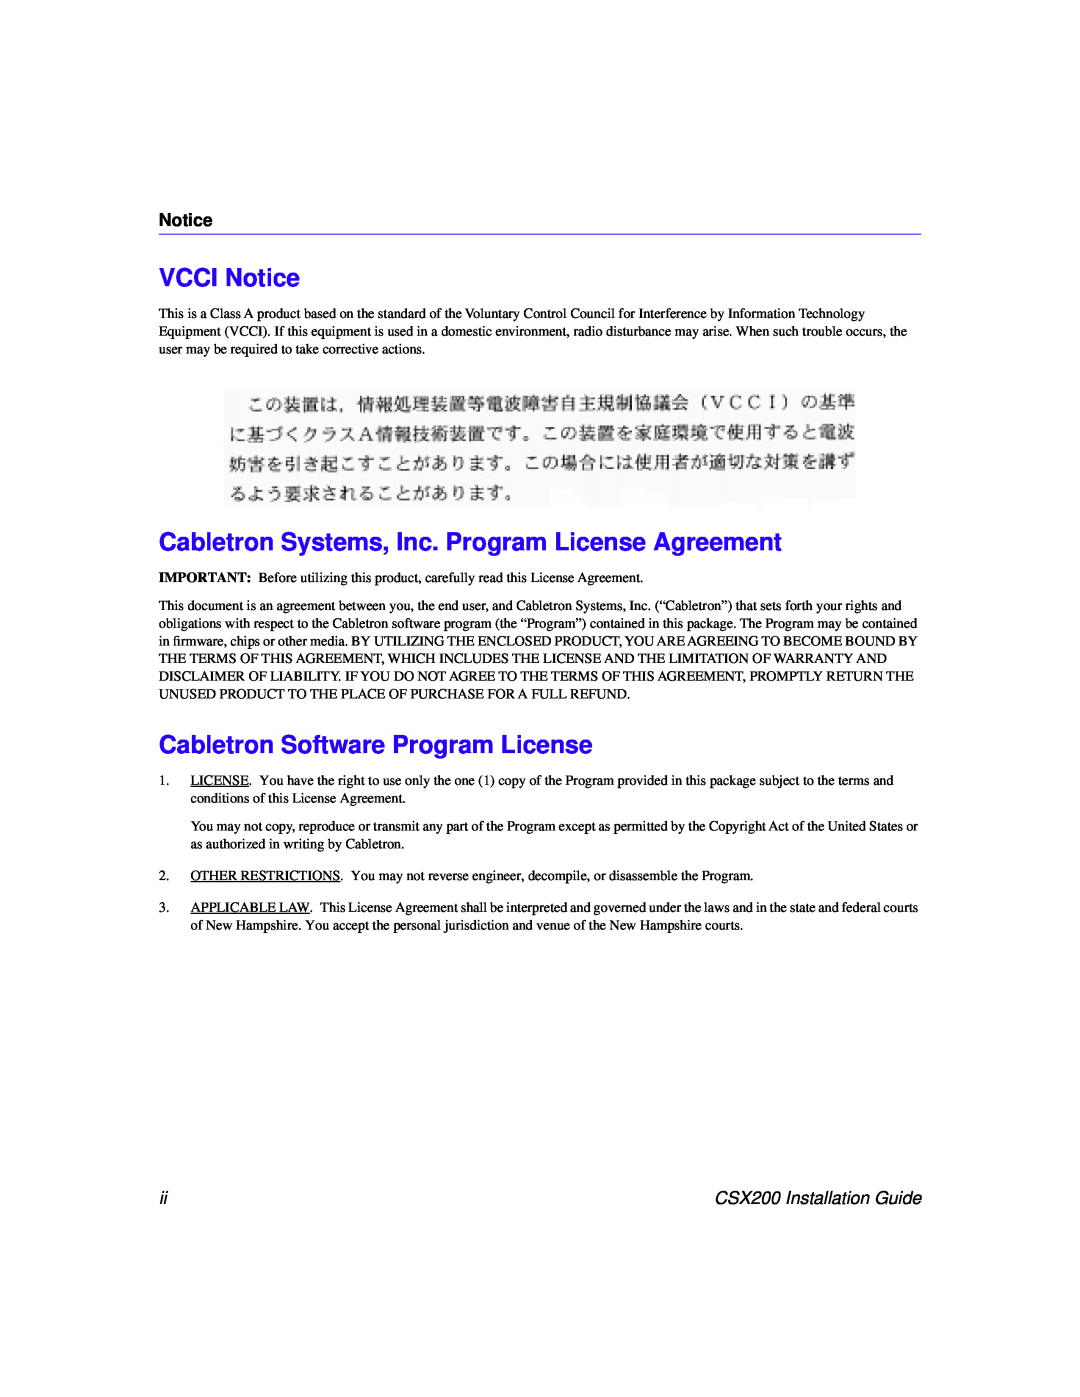 Cabletron Systems manual VCCI Notice, Cabletron Systems, Inc. Program License Agreement, CSX200 Installation Guide 